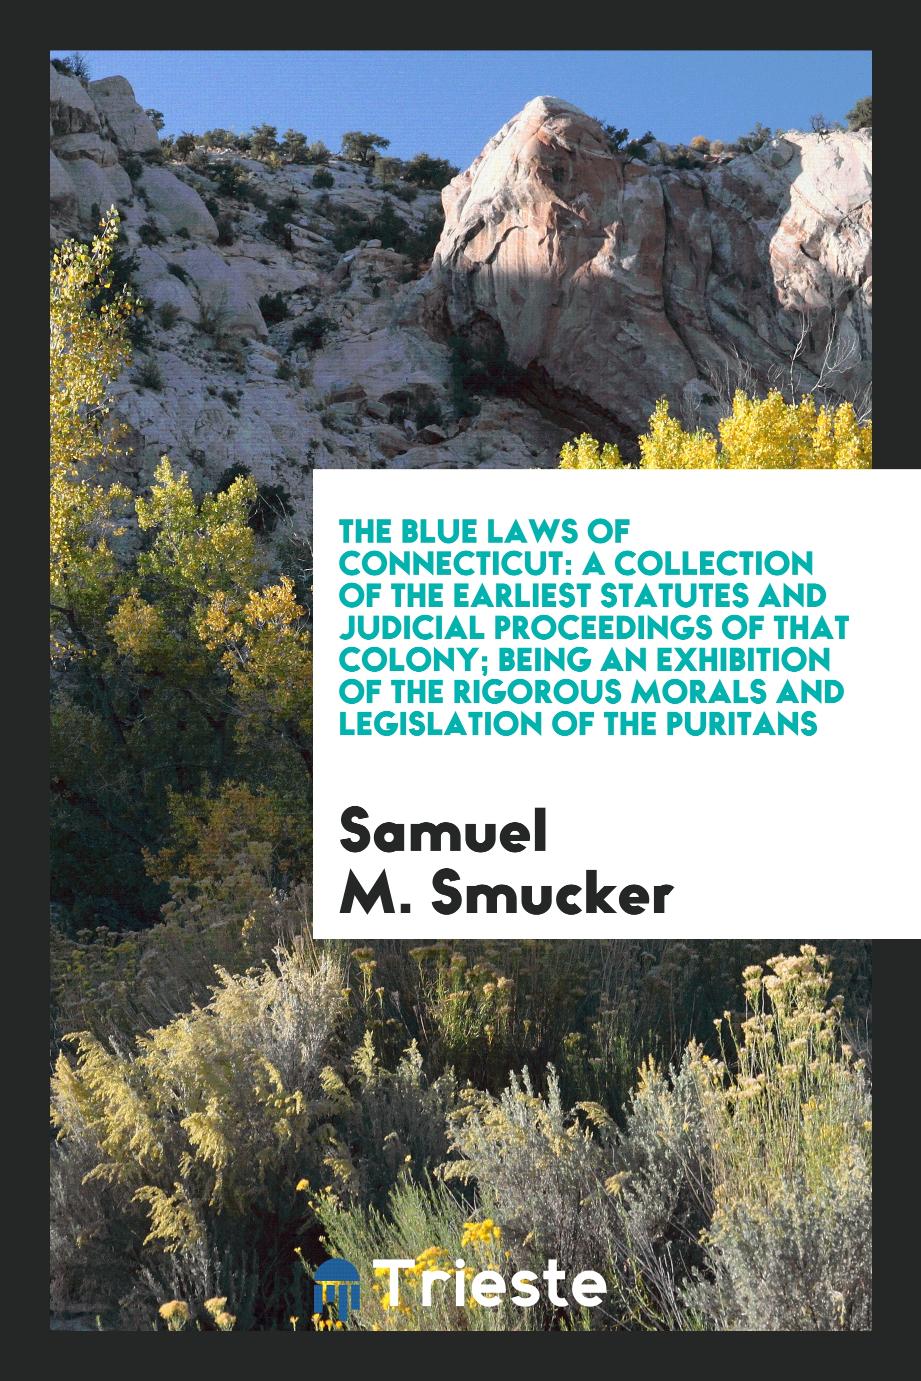 The Blue Laws of Connecticut: A Collection of the Earliest Statutes and Judicial Proceedings of That Colony; Being an Exhibition of the Rigorous Morals and Legislation of the Puritans